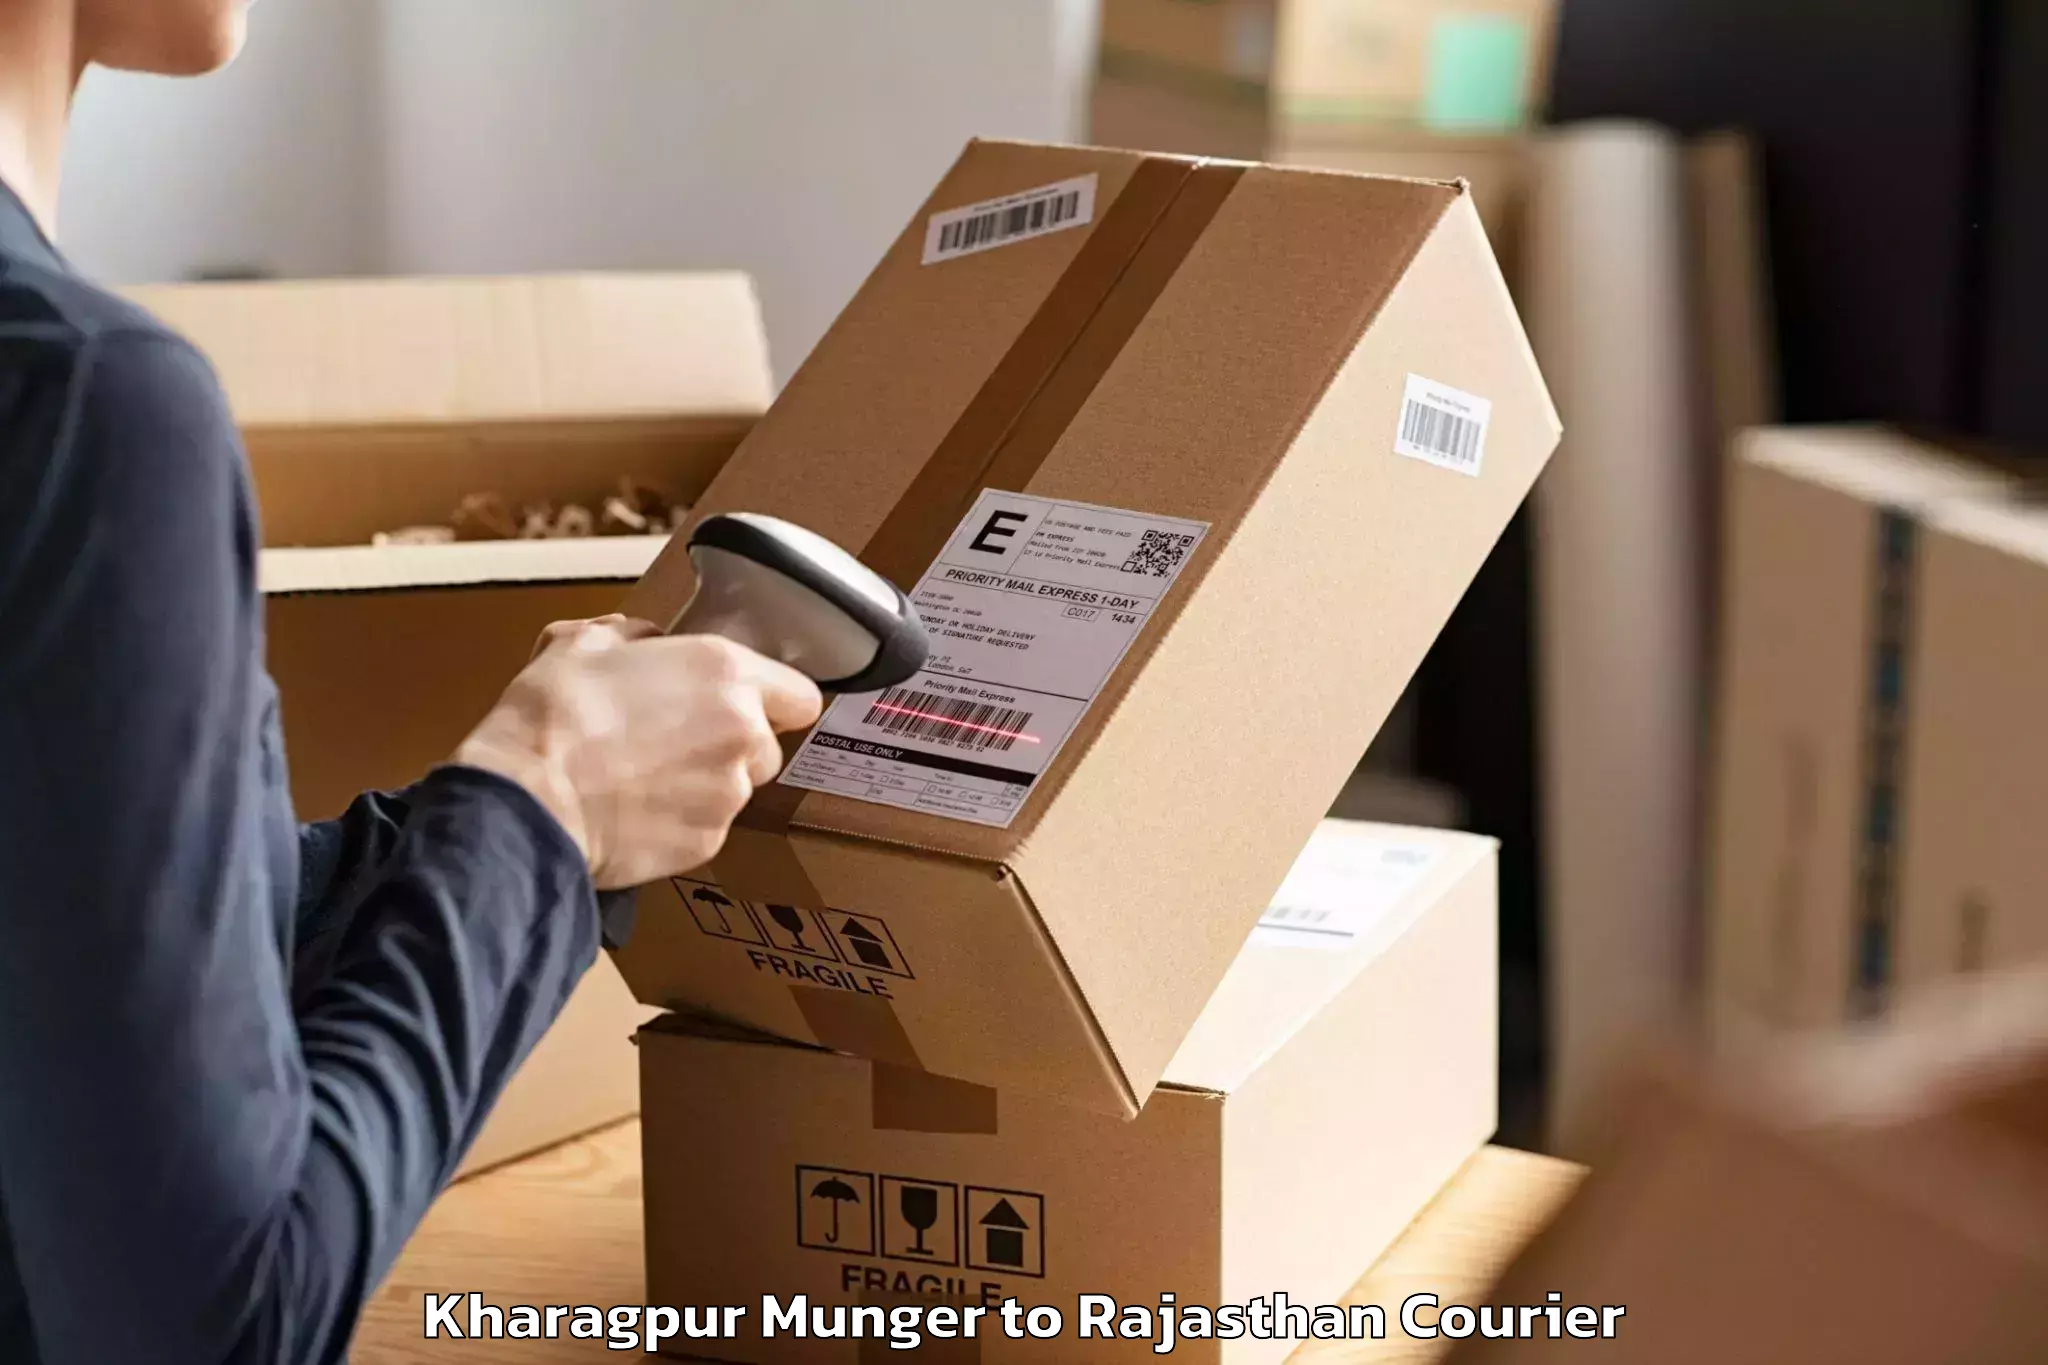 Safe household movers in Kharagpur Munger to Mathania